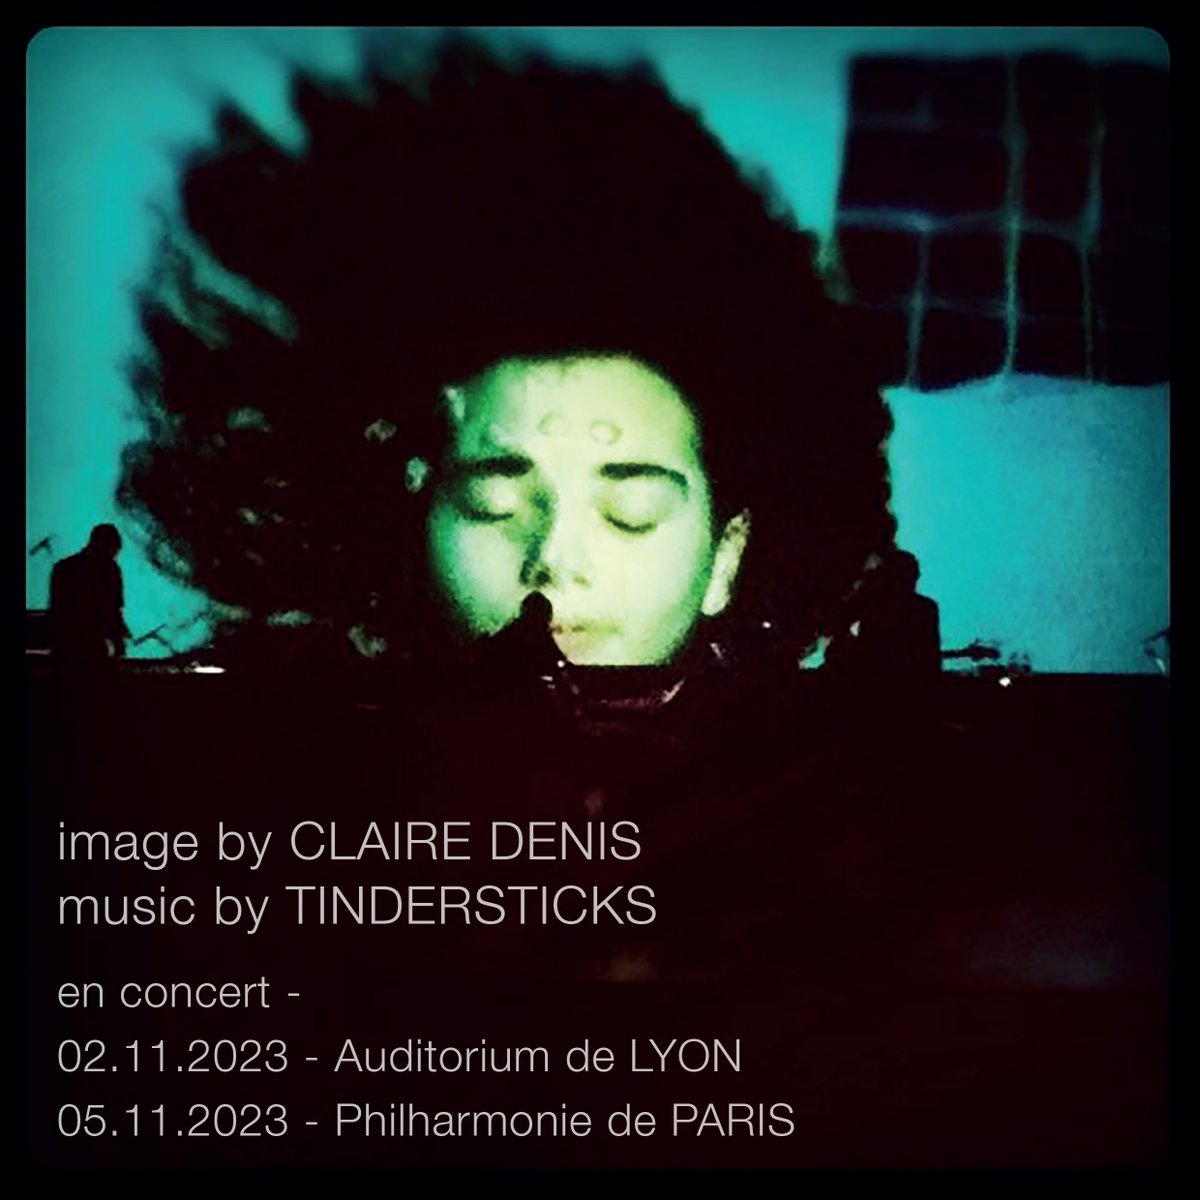 We are looking forward to the concerts. Everyone is working hard to make them happen - Quite an undertaking! To coincide, we have made available the remaining unreleased Claire Denis Soundtracks on all digital platforms tindersticks.co.uk